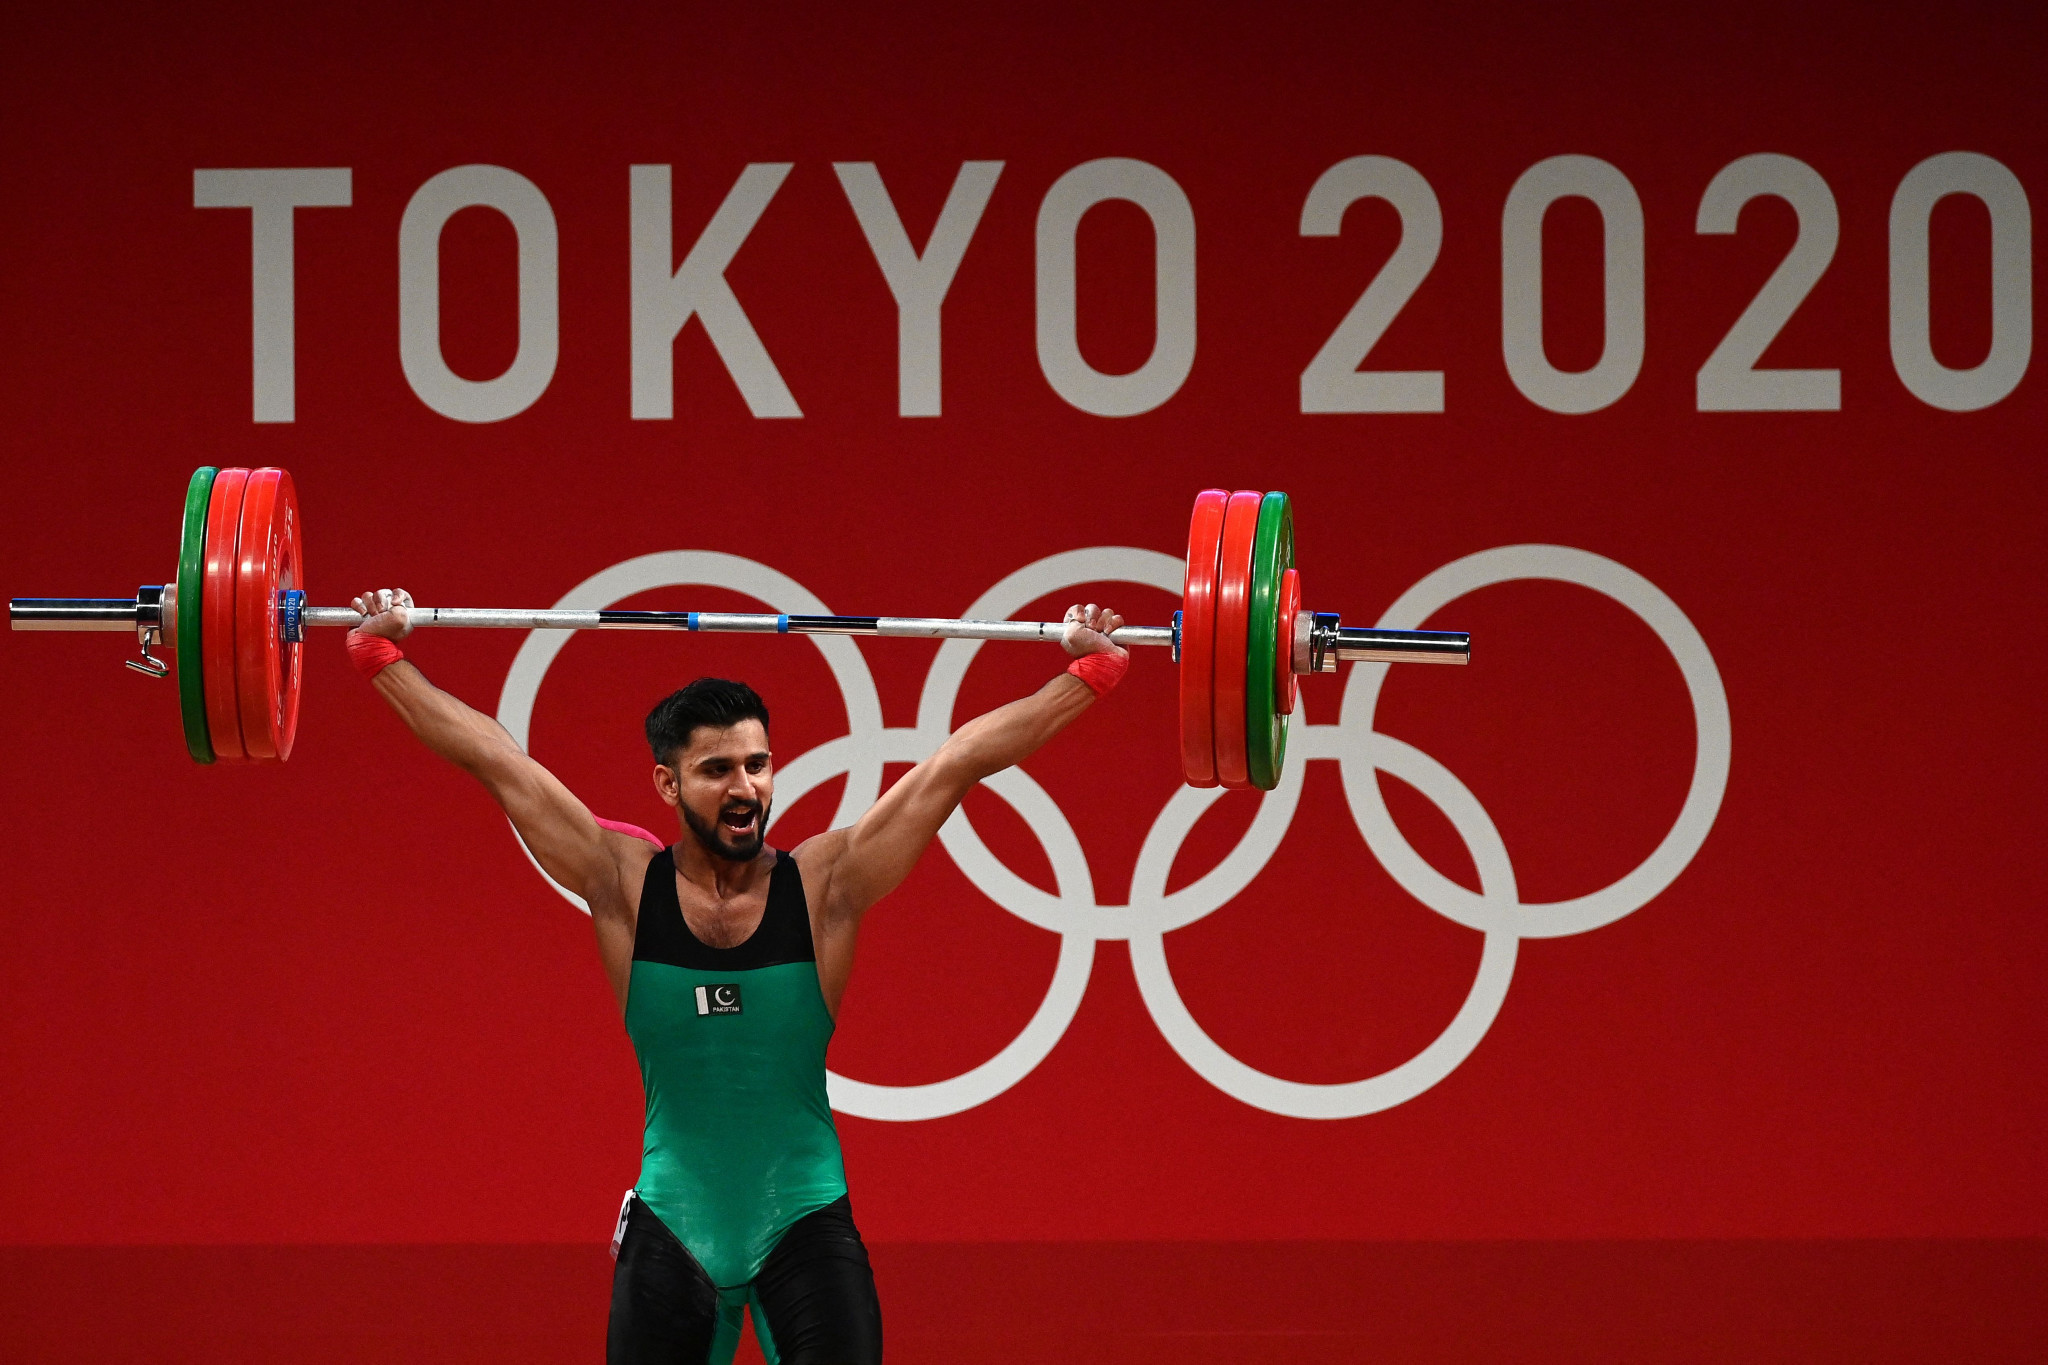 Pakistan's Talha Talib, who competed at Tokyo 2020, has been banned for three-years after a doping offence ©Getty Images